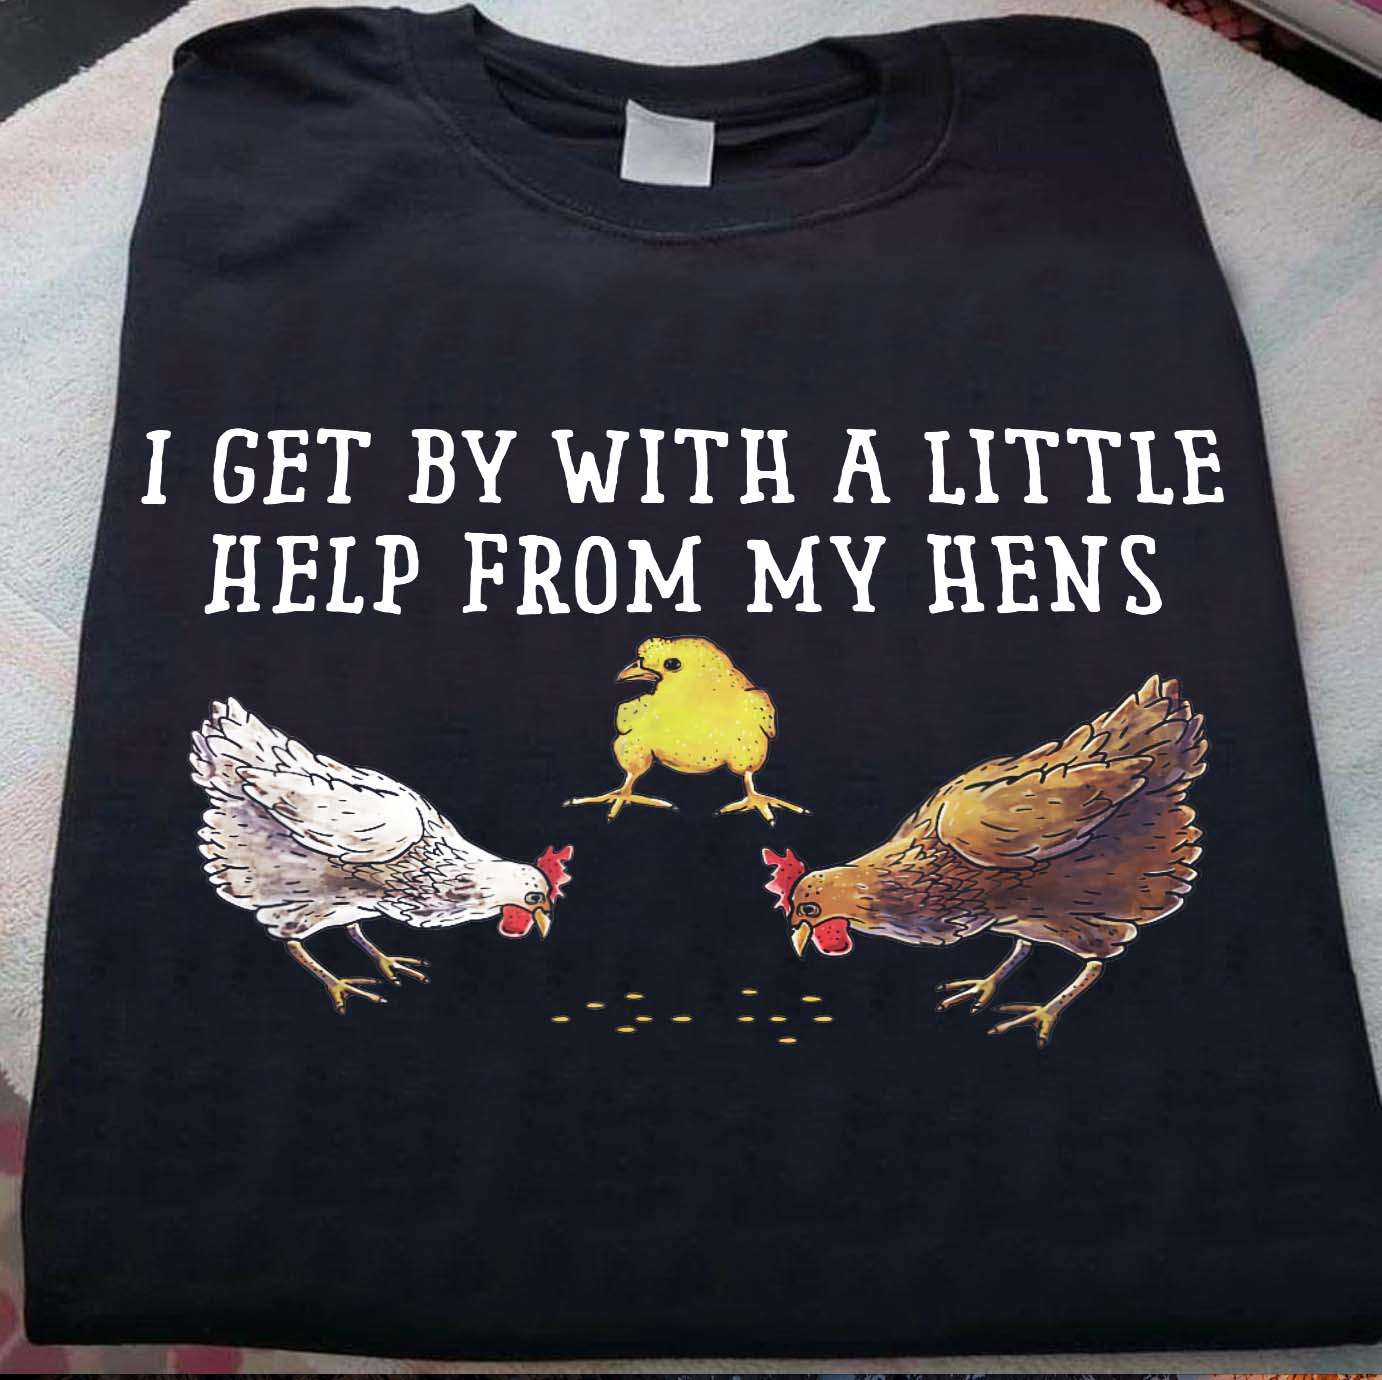 Love Chicken - Get by with a little help from my hens